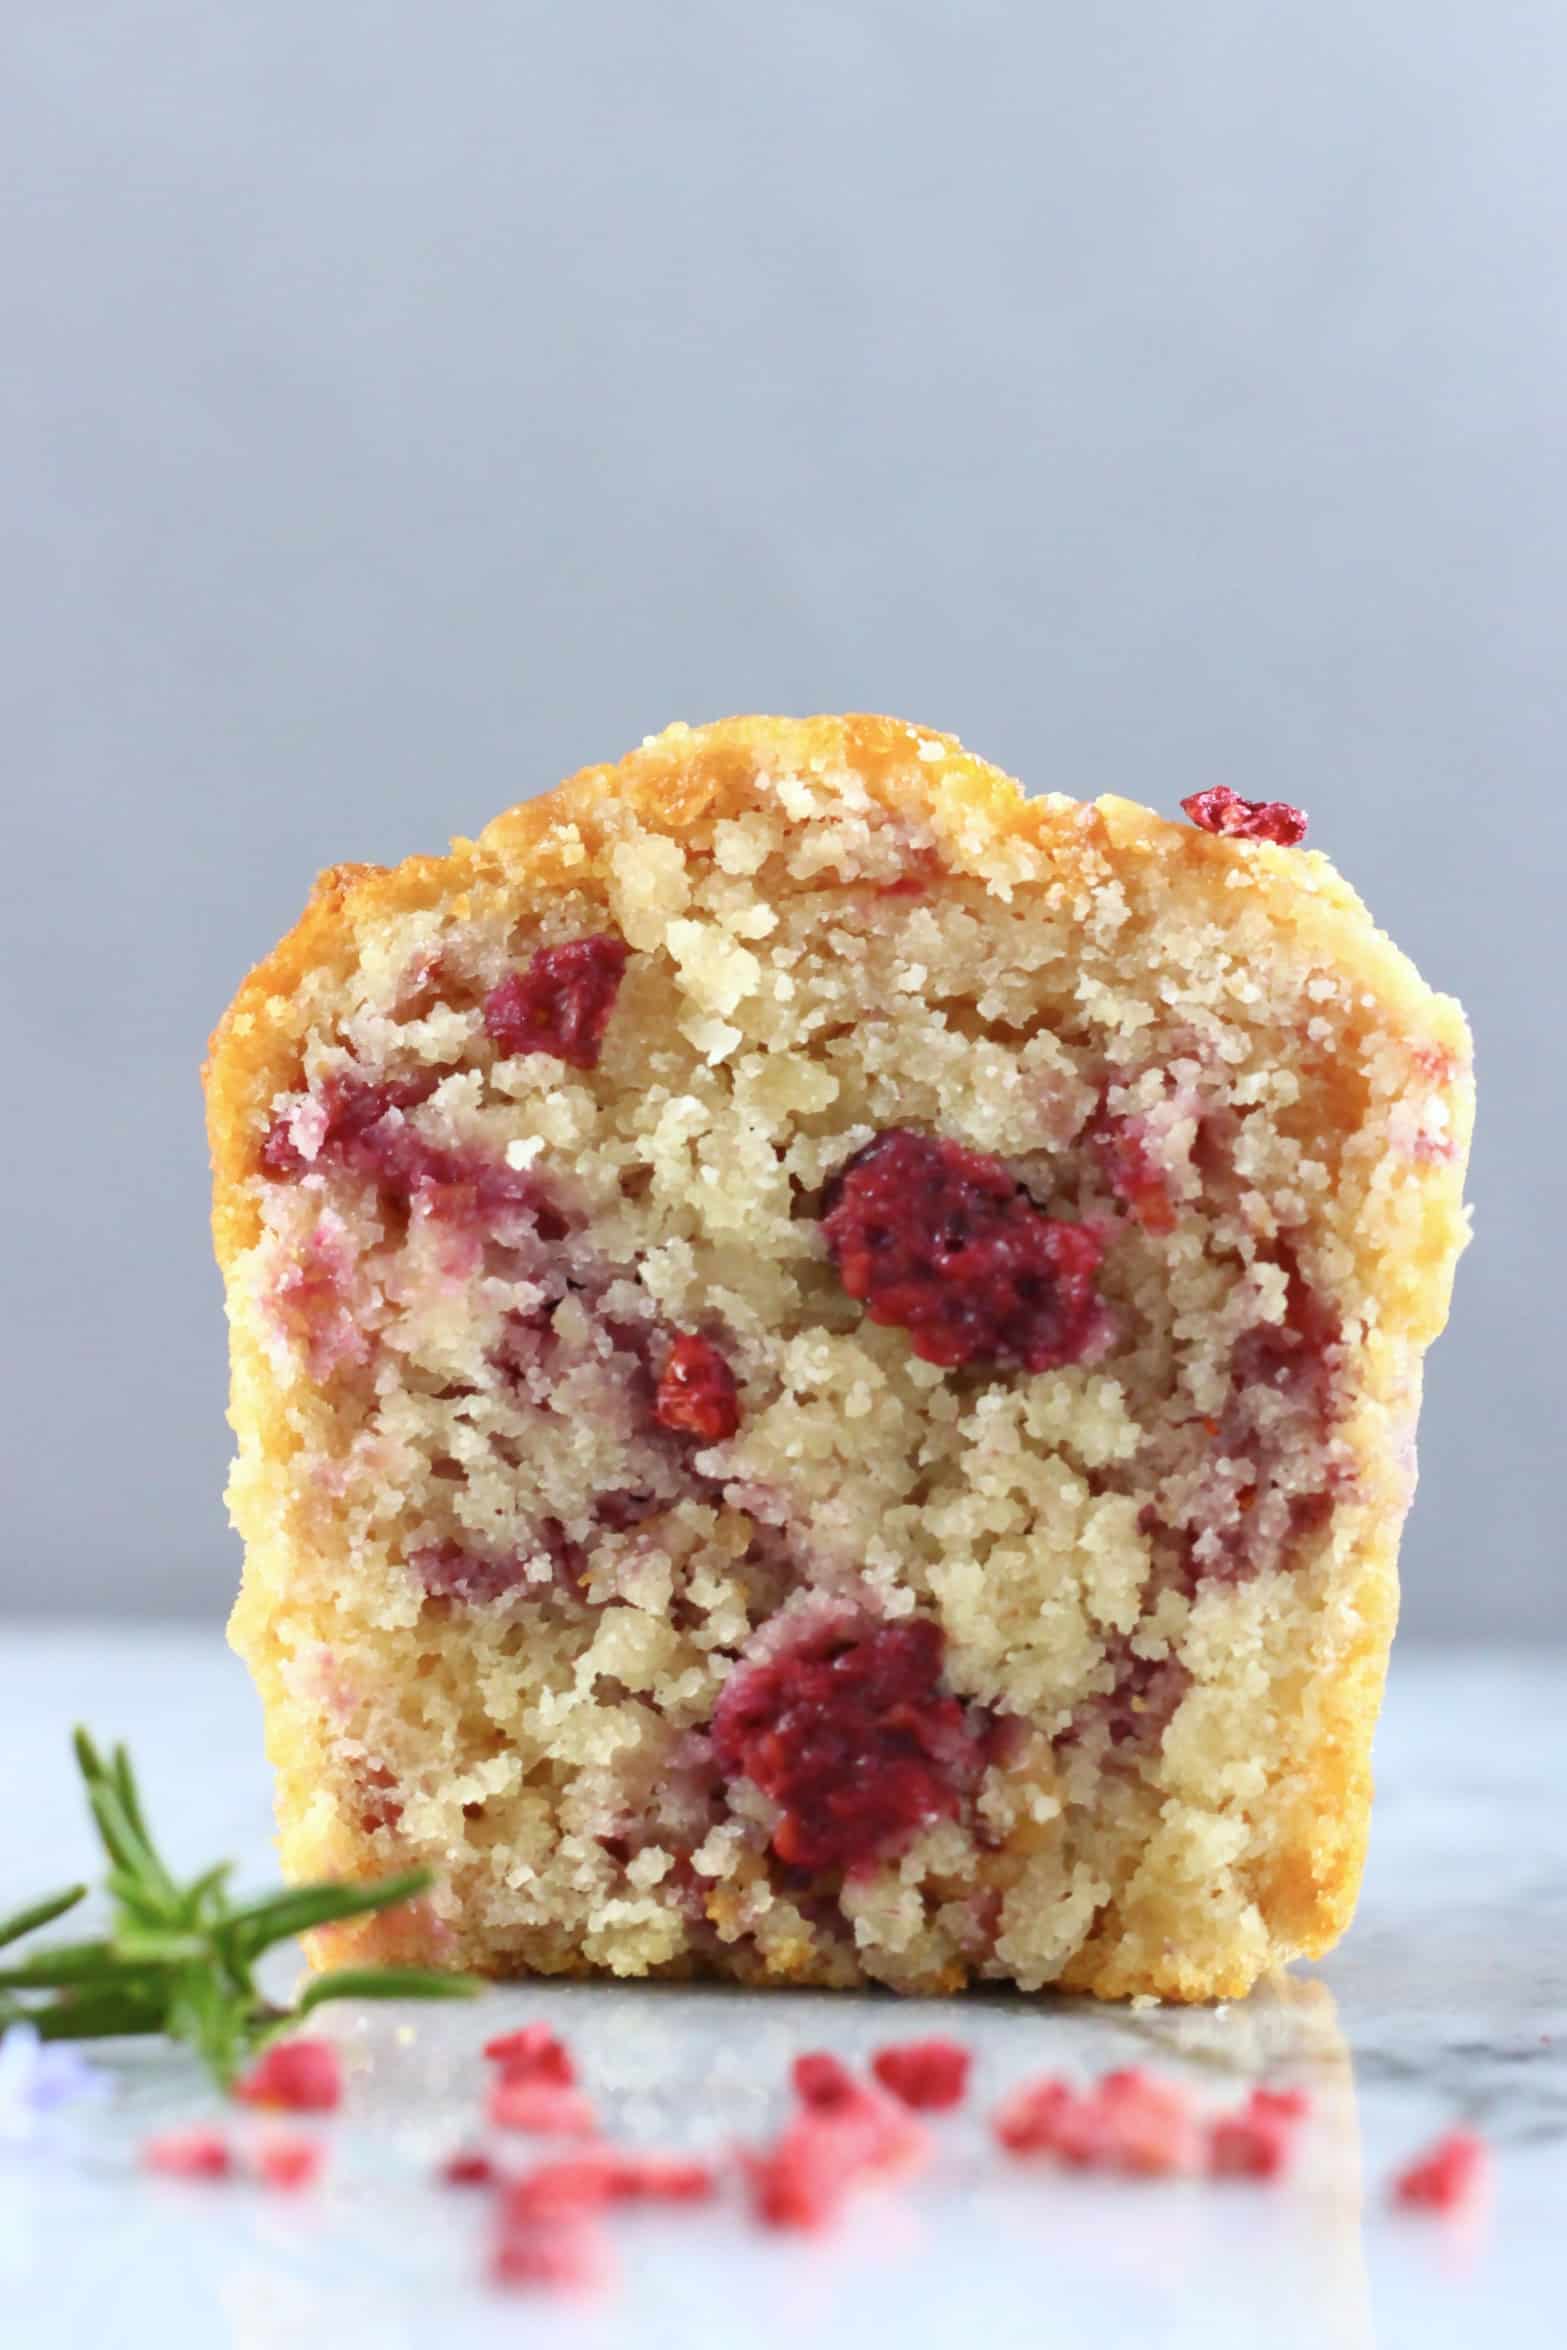 A halved gluten-free vegan raspberry muffin on a marble background